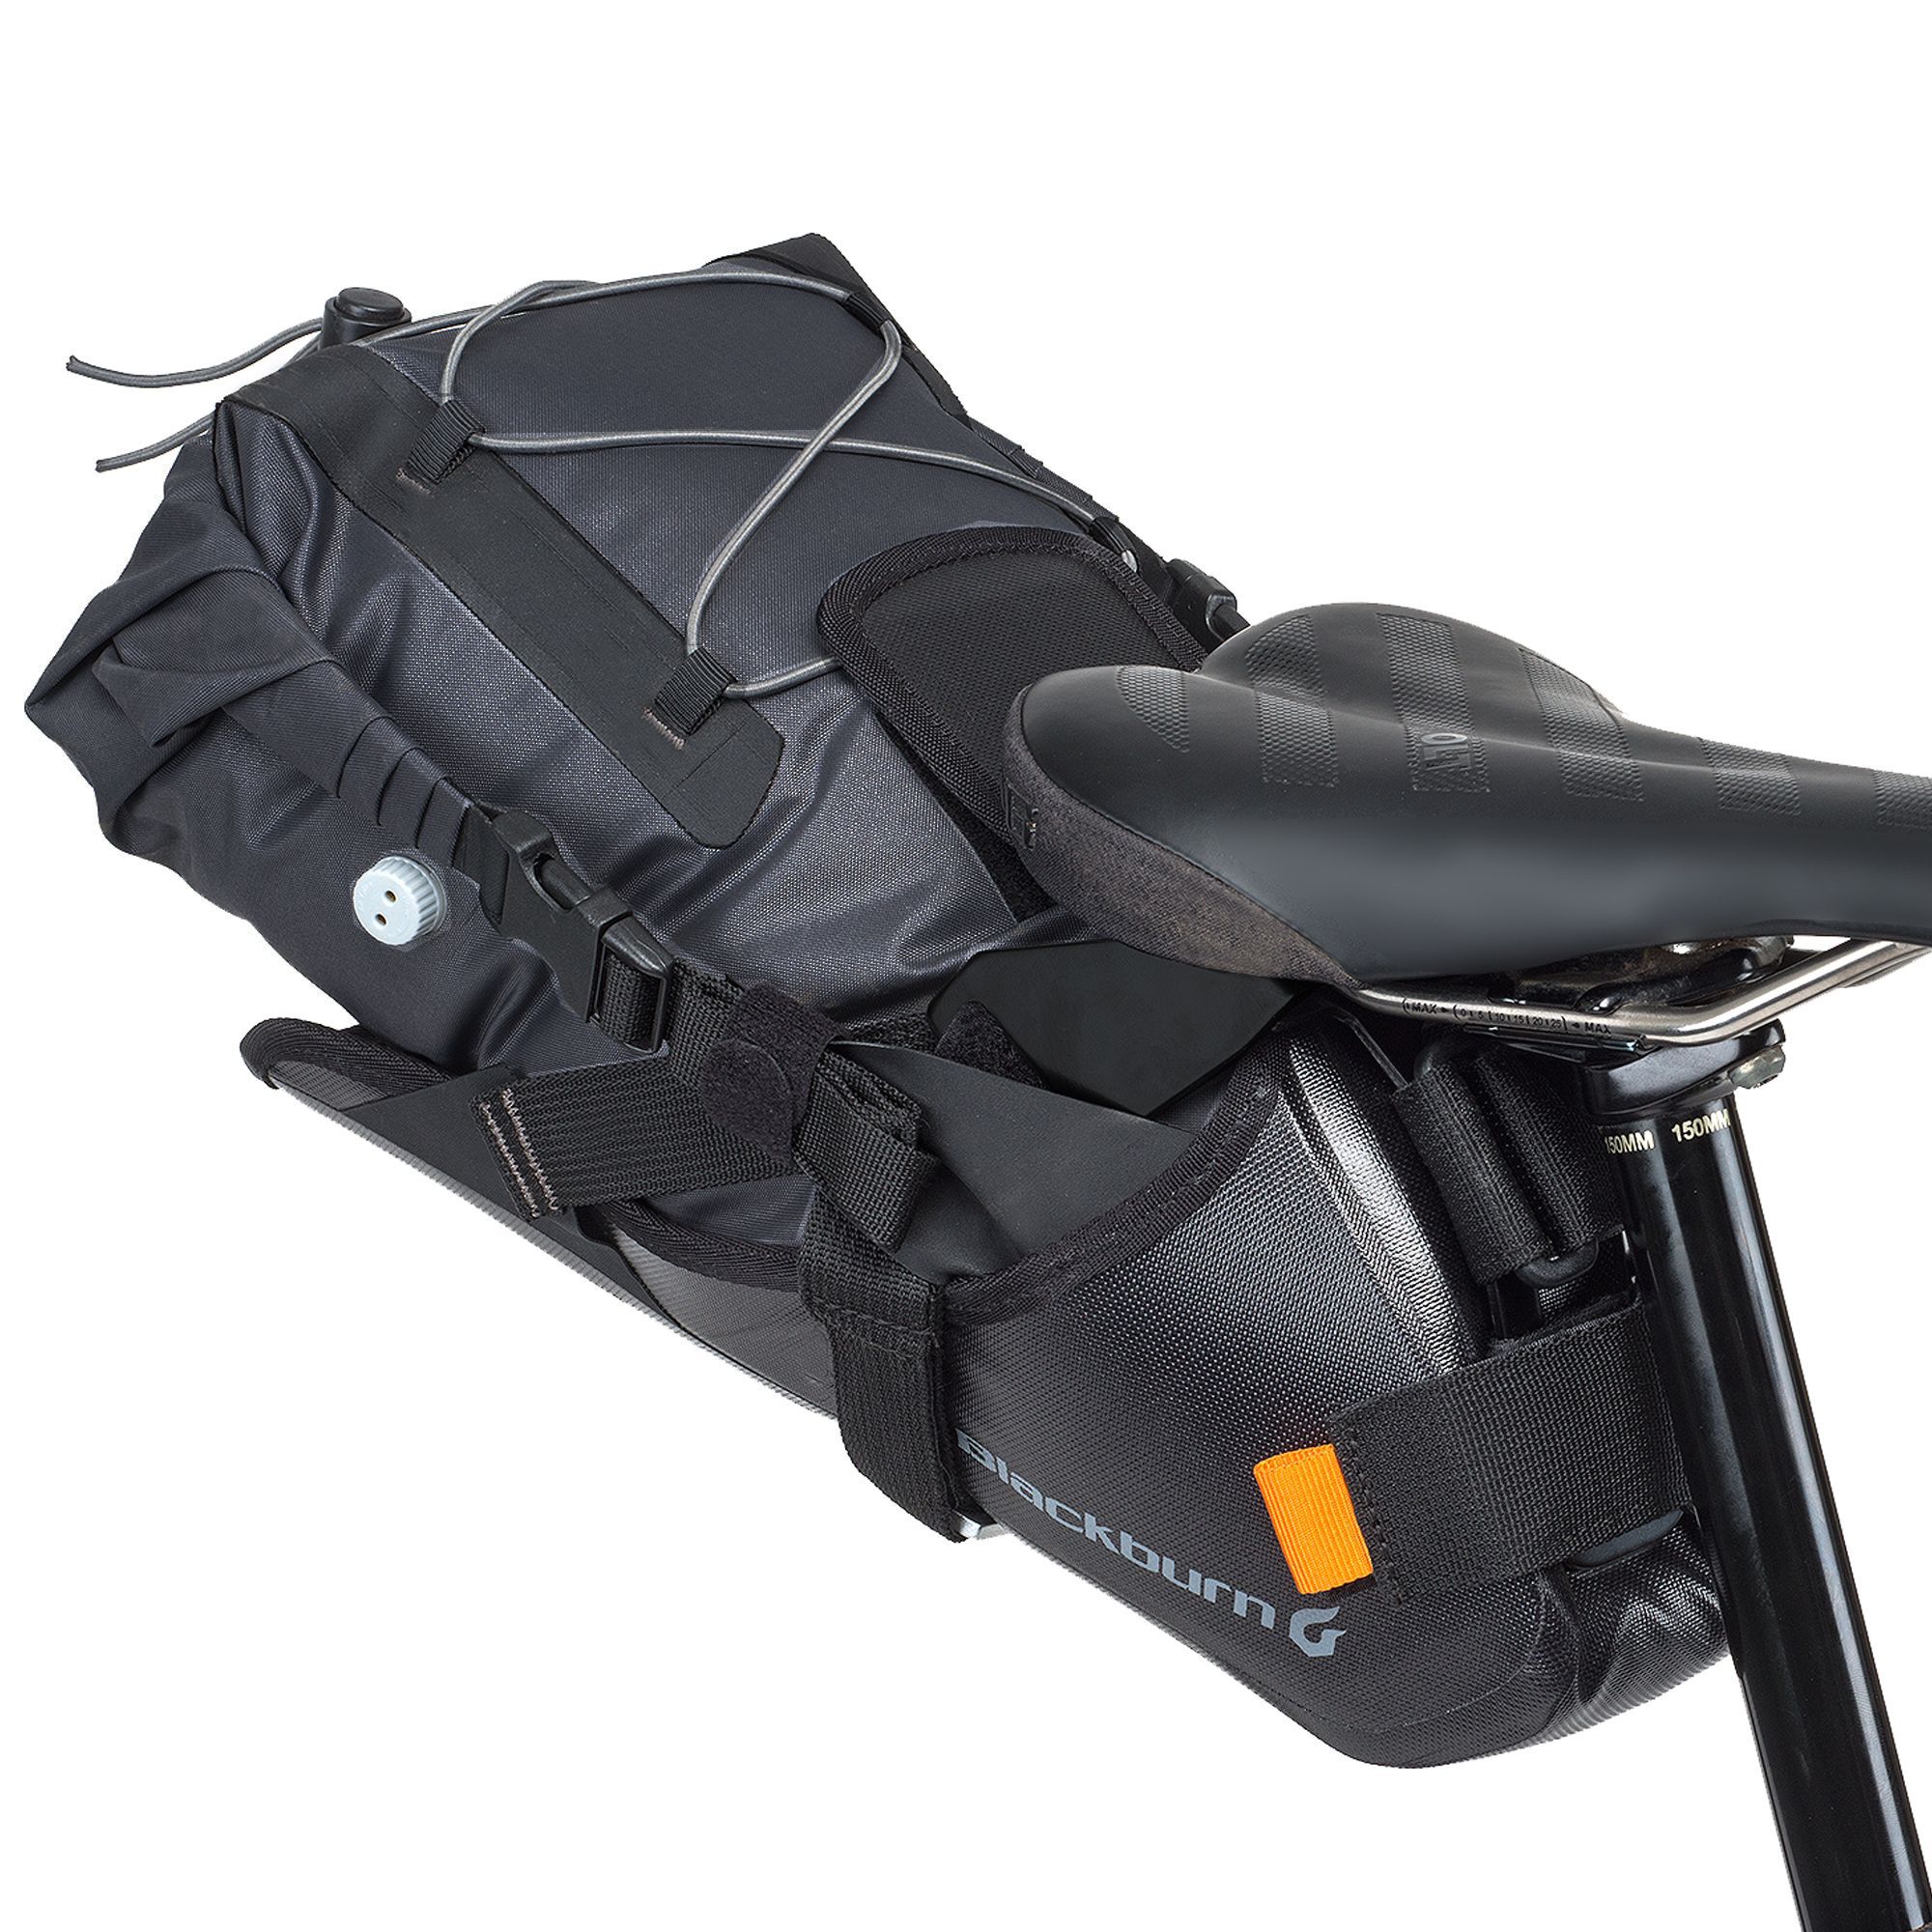 Outpost Elite Universal Seat Pack and Dry Bag | Blackburn